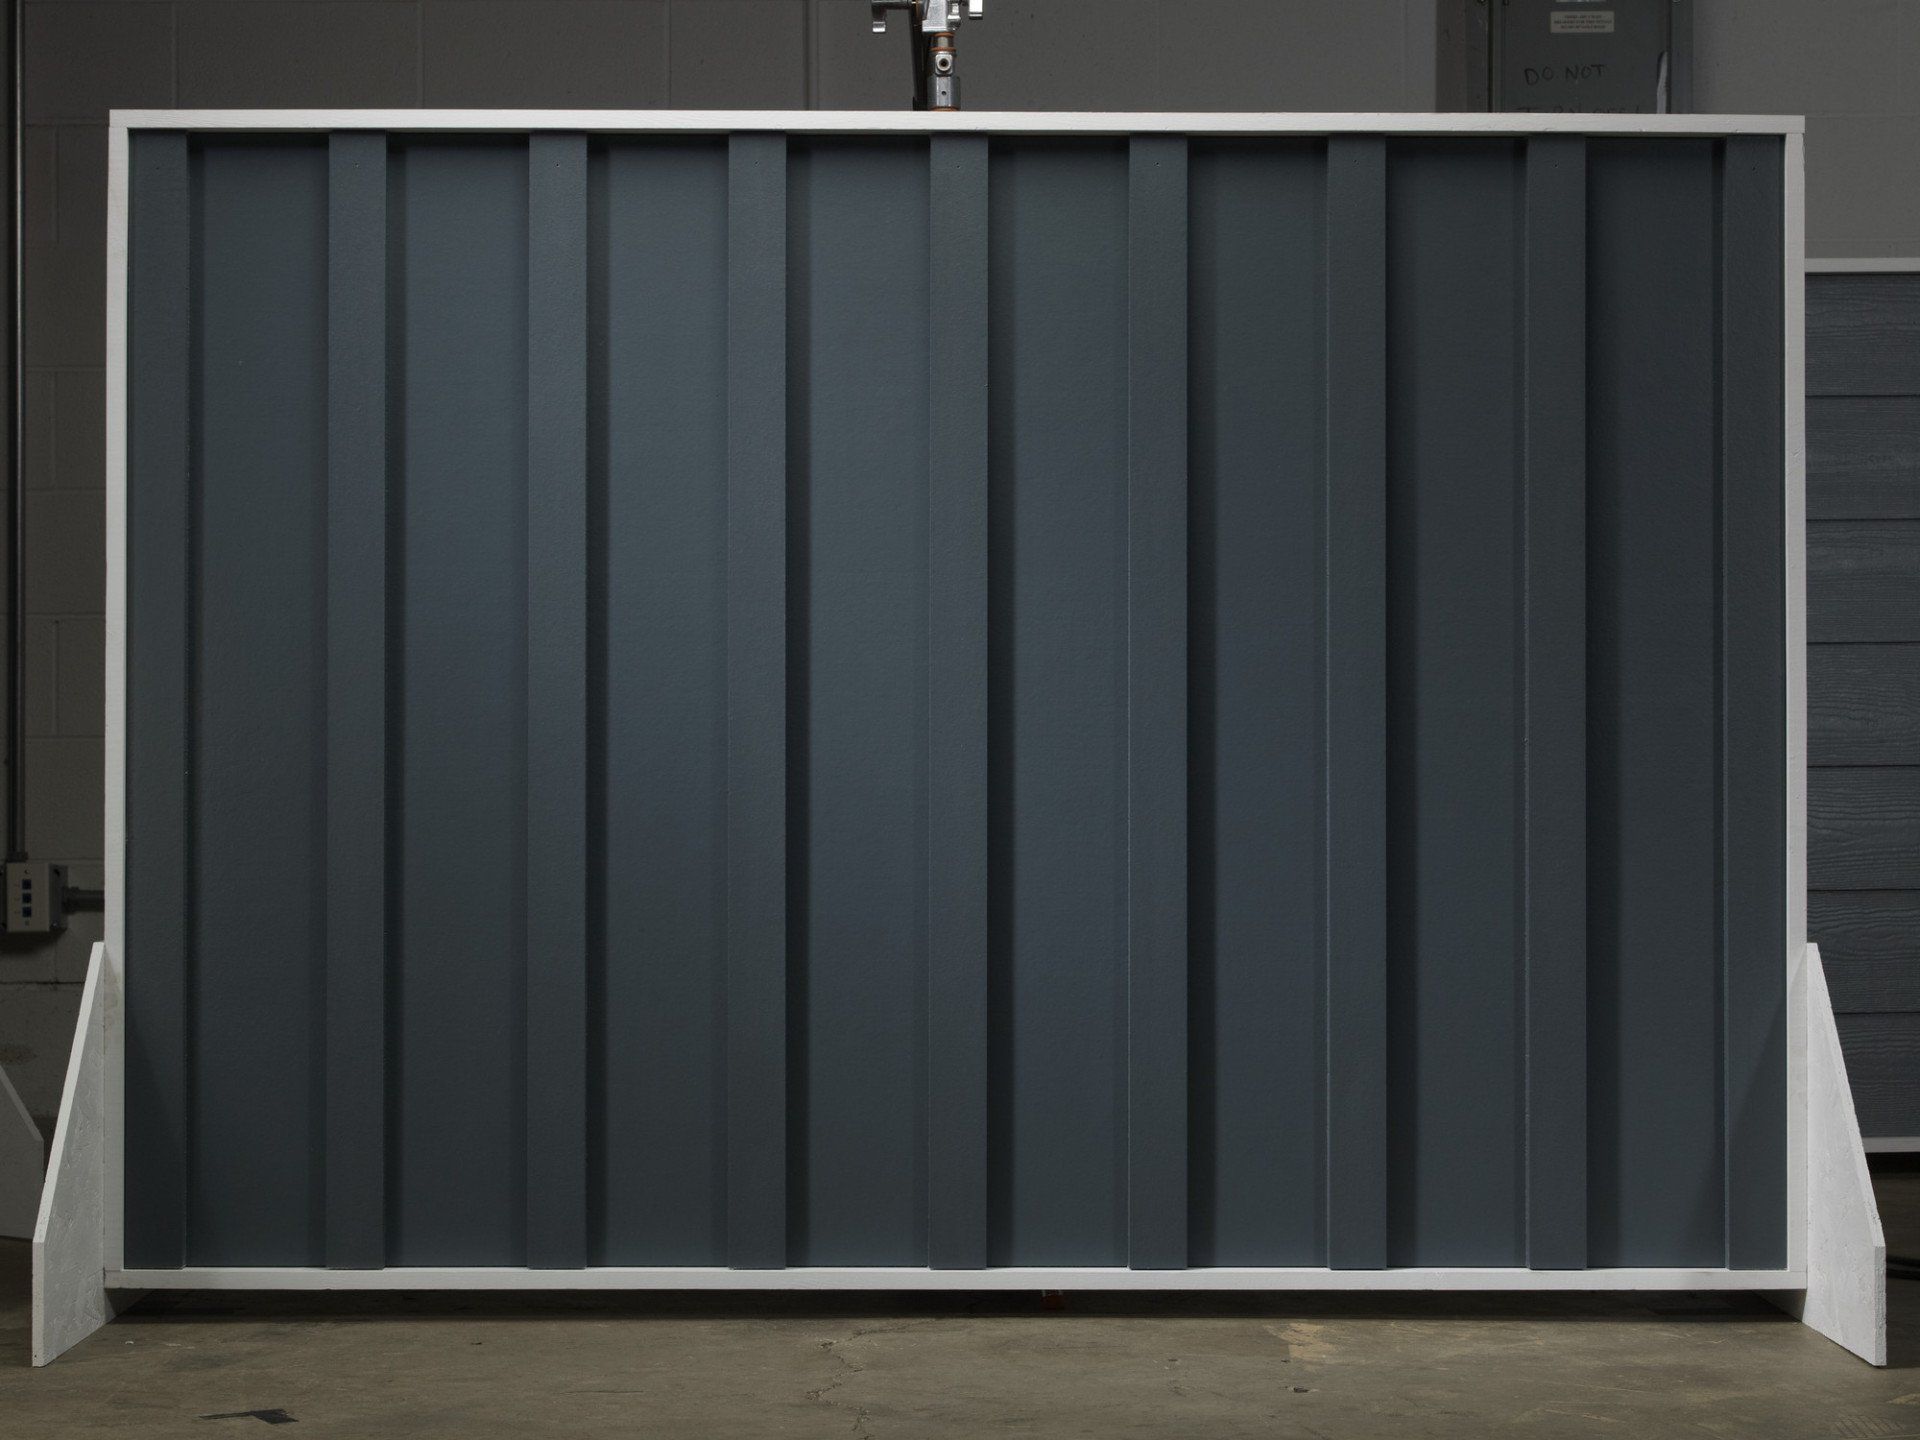 Evening Blue smooth vertical siding with Batten Strips